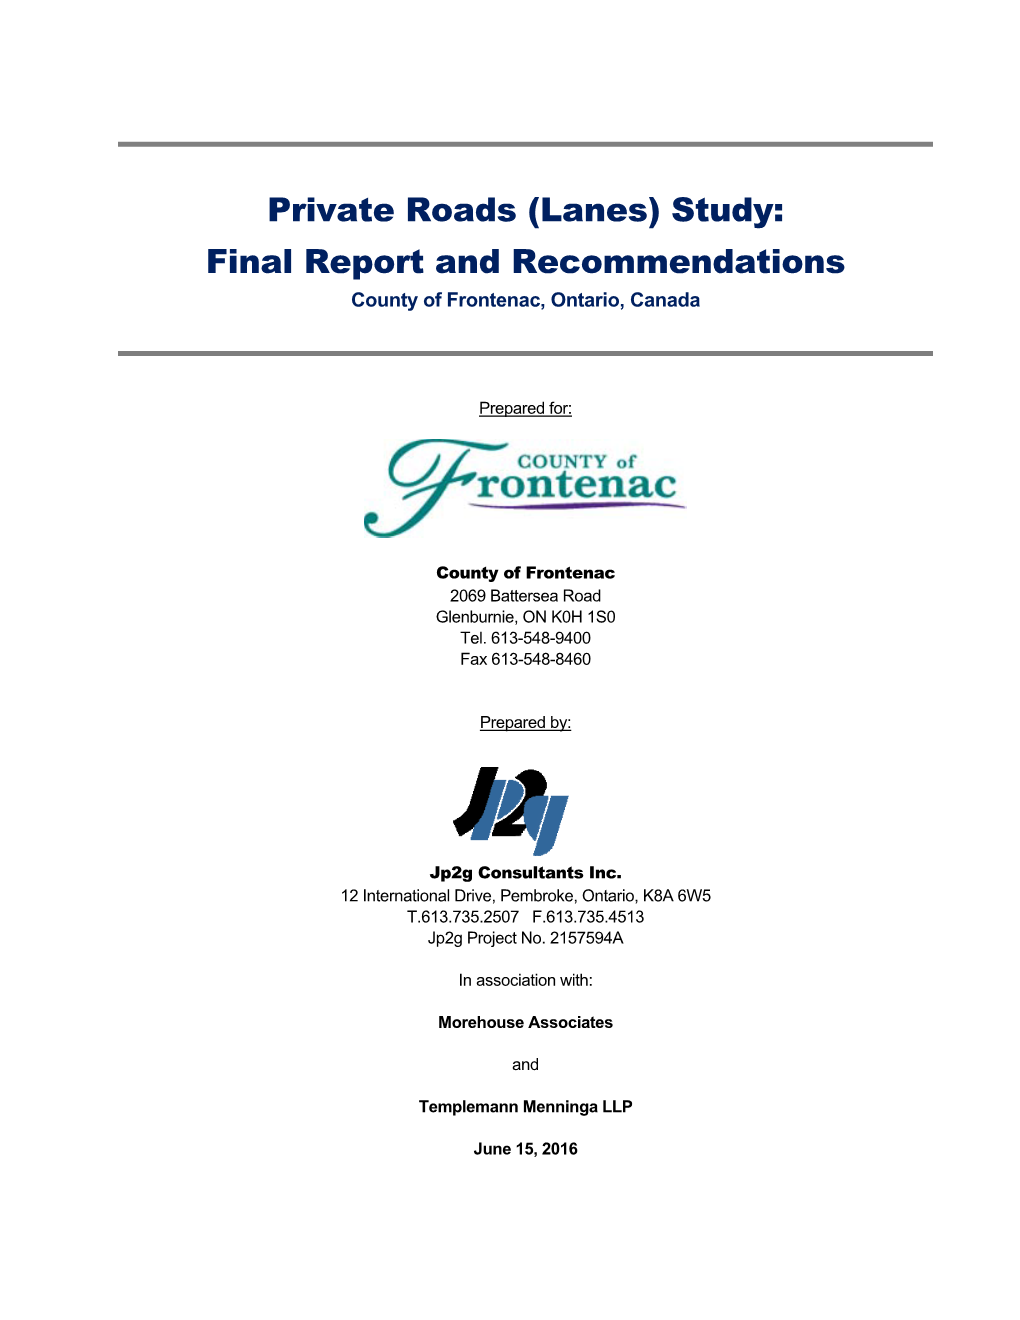 Private Roads (Lanes) Study: Final Report and Recommendations County of Frontenac, Ontario, Canada